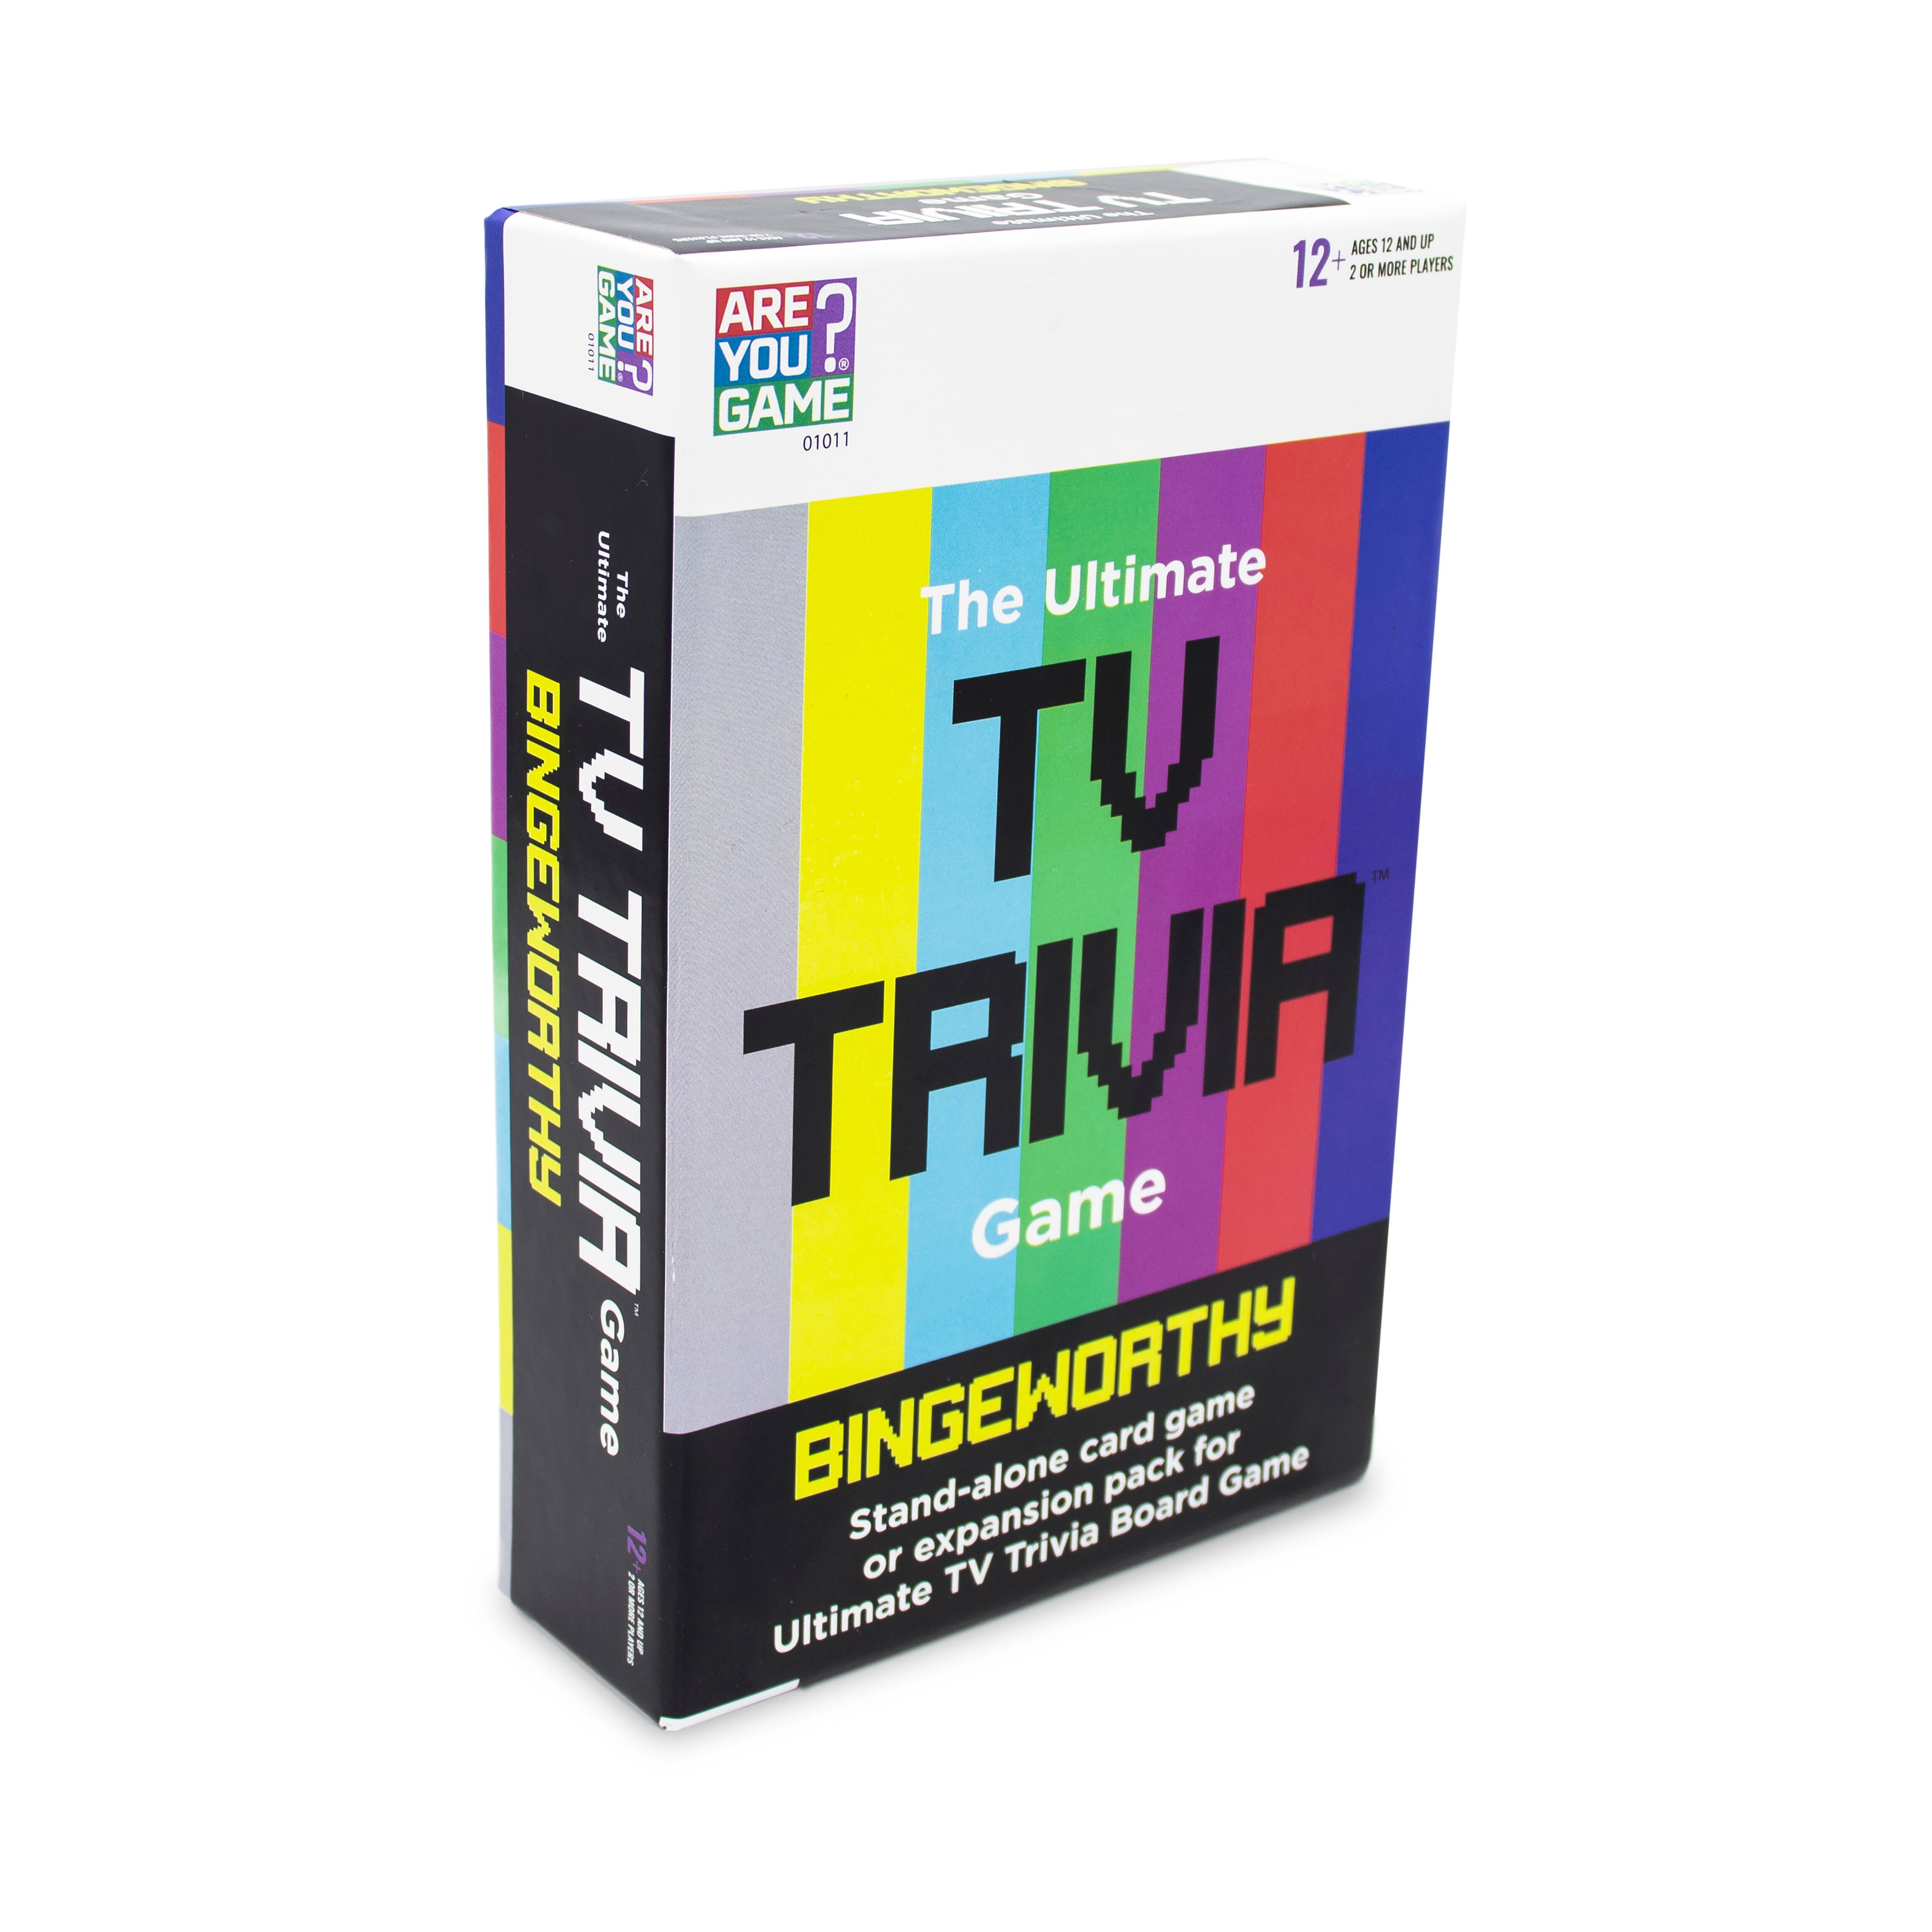 The Ultimate TV Trivia Game - Bingeworthy Expansion